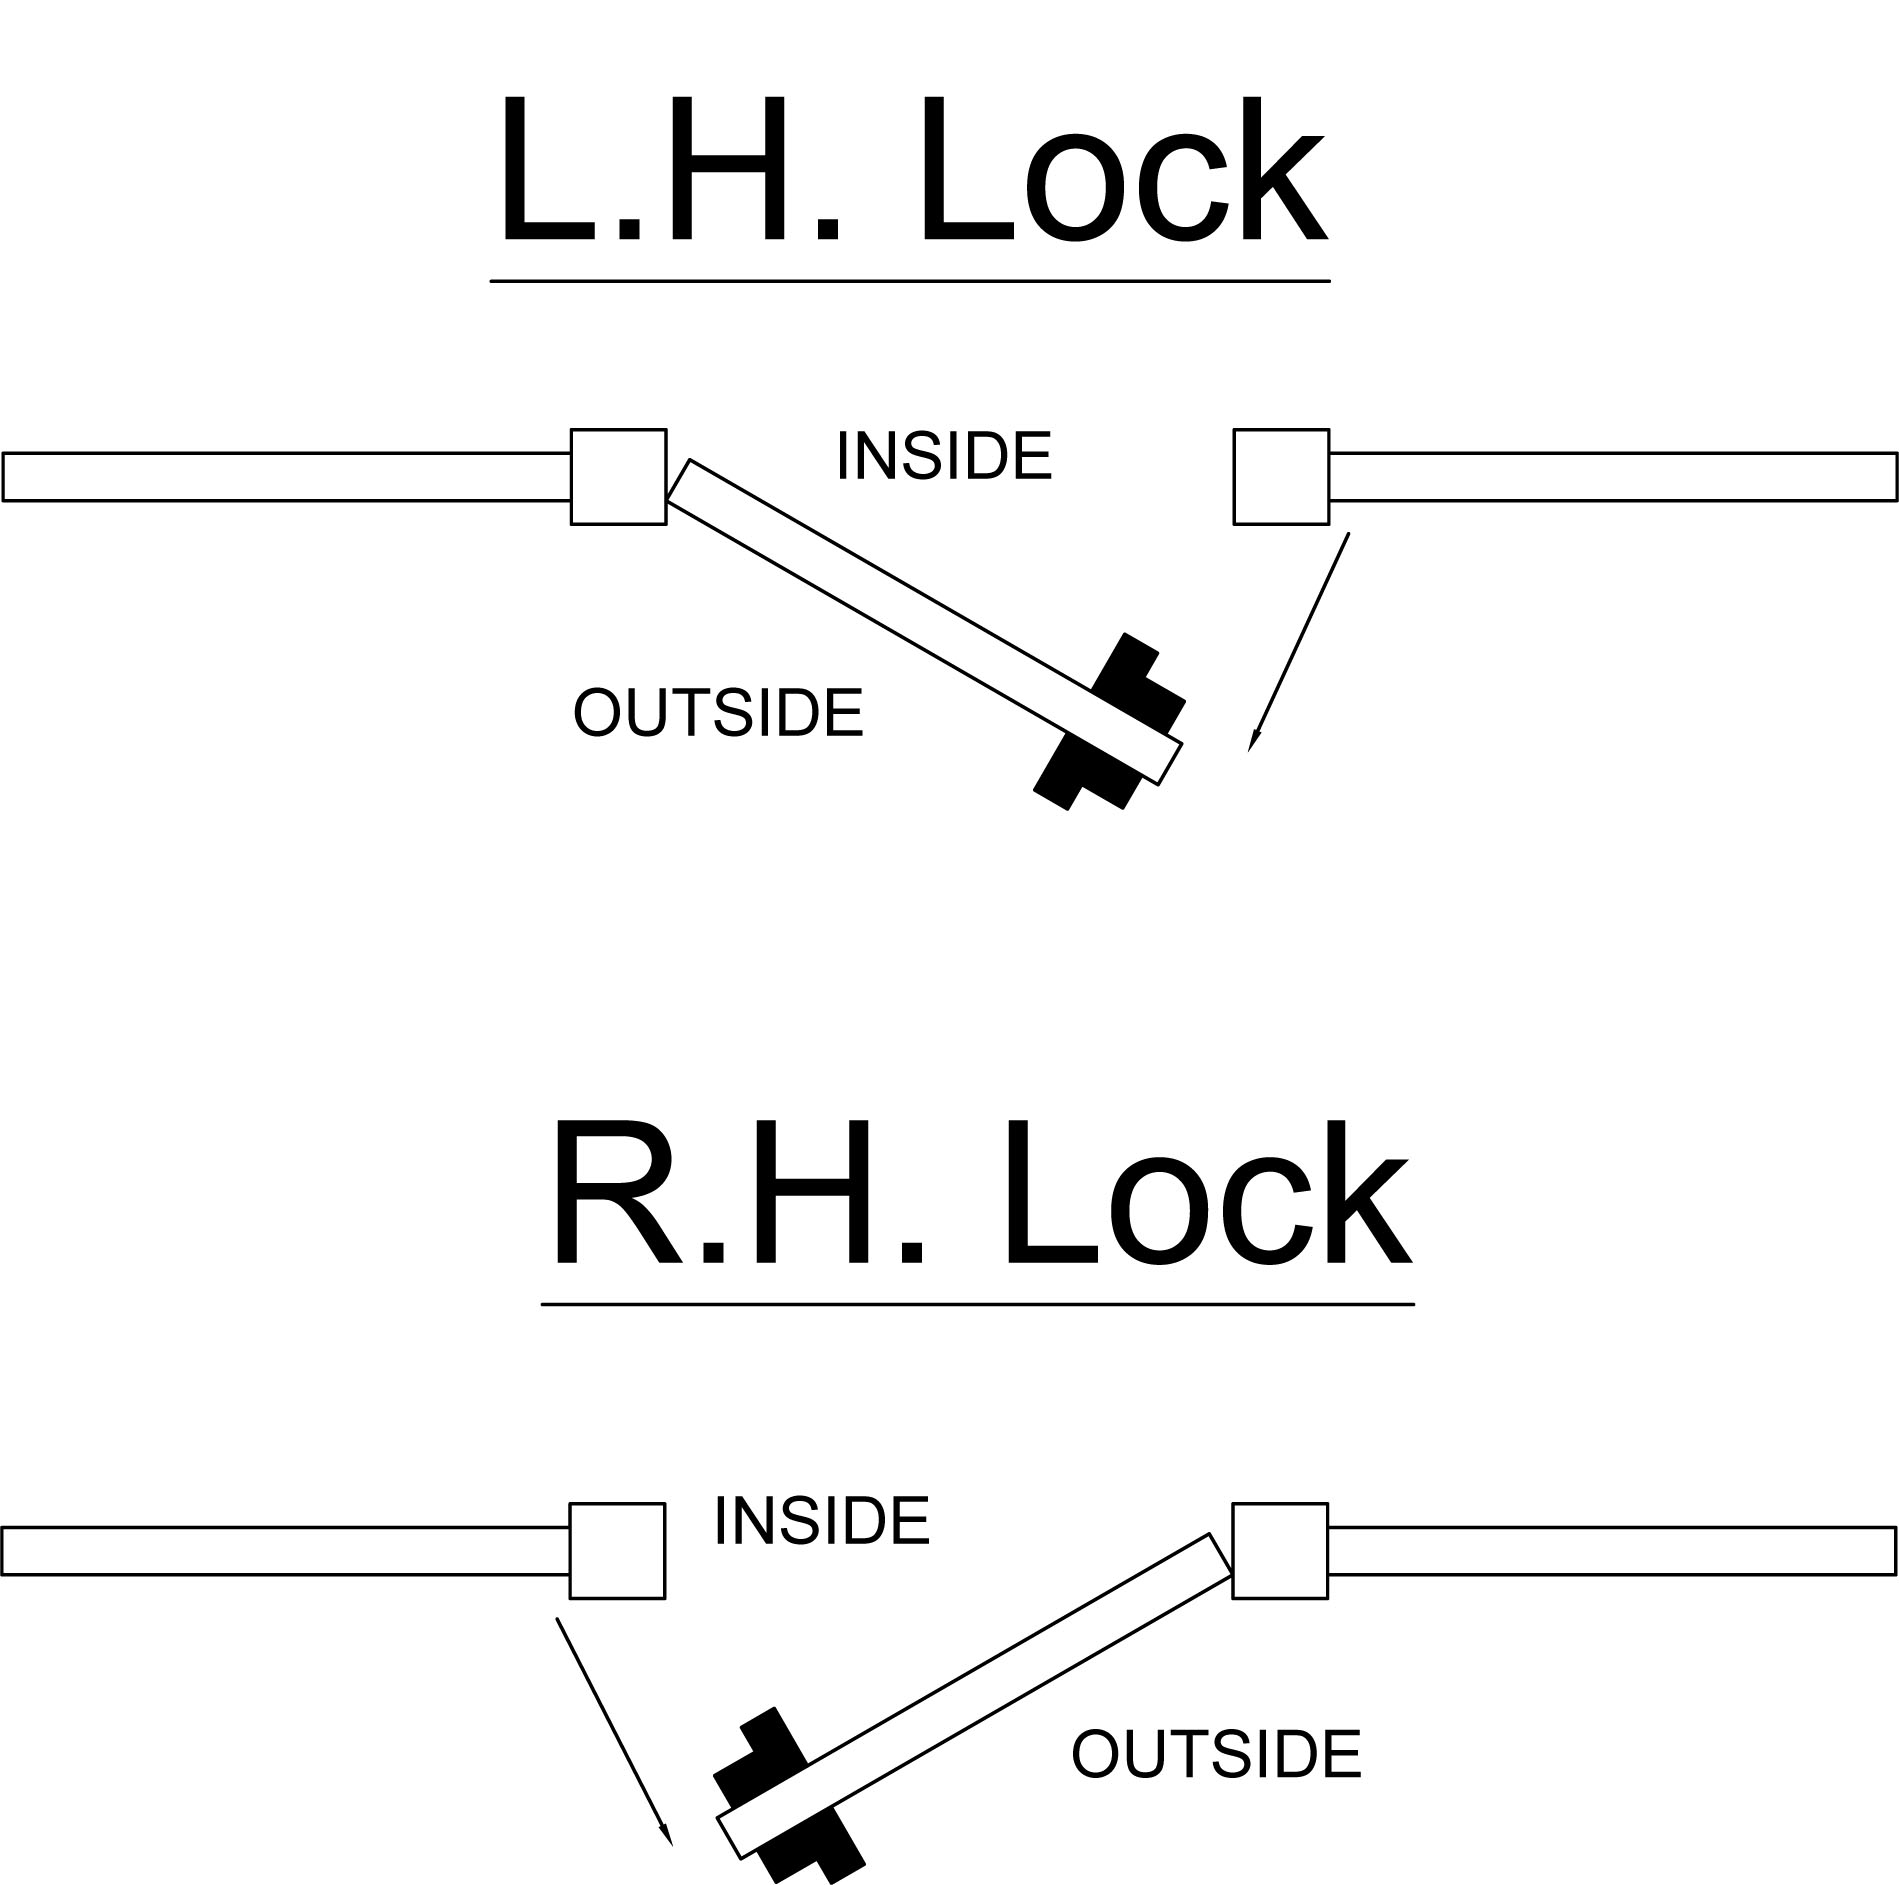 Diagram of working out lock handing. Top diagram: visual of left-handed gate with hinges on the left. Bottom: Right handed gate with hinges on the right